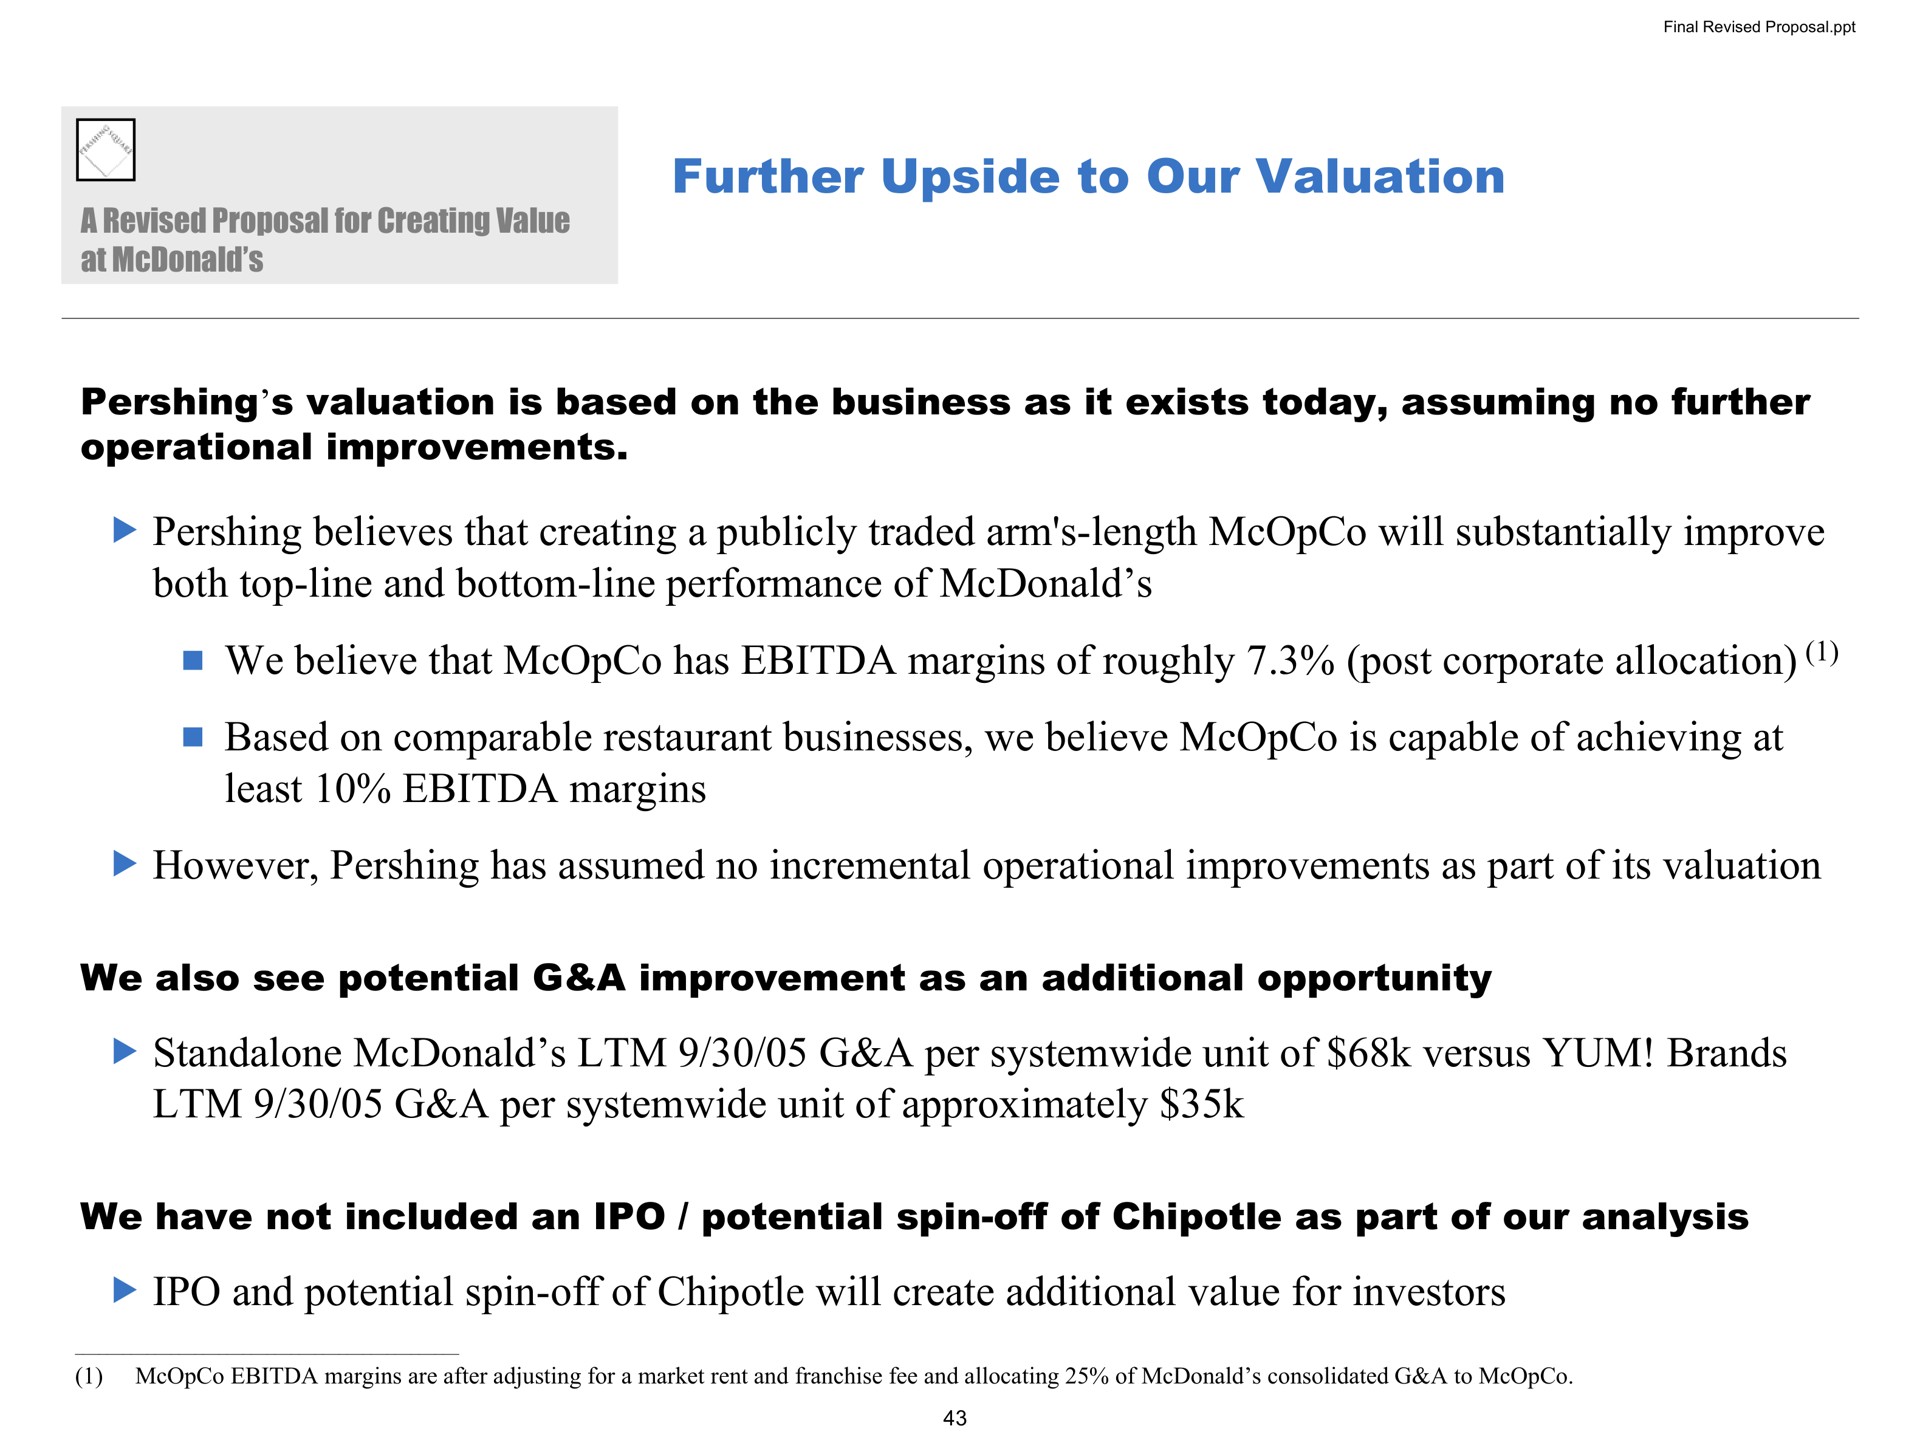 further upside to our valuation valuation is based on the business as it exists today assuming no further operational improvements believes that creating a publicly traded arm length will substantially improve both top line and bottom line performance of we believe that has margins of roughly post corporate allocation based on comparable restaurant businesses we believe is capable of achieving at least margins however has assumed no incremental operational improvements as part of its valuation we also see potential a improvement as an additional opportunity a per unit of versus brands a per unit of approximately we have not included an potential spin off of as part of our analysis and potential spin off of will create additional value for investors | Pershing Square